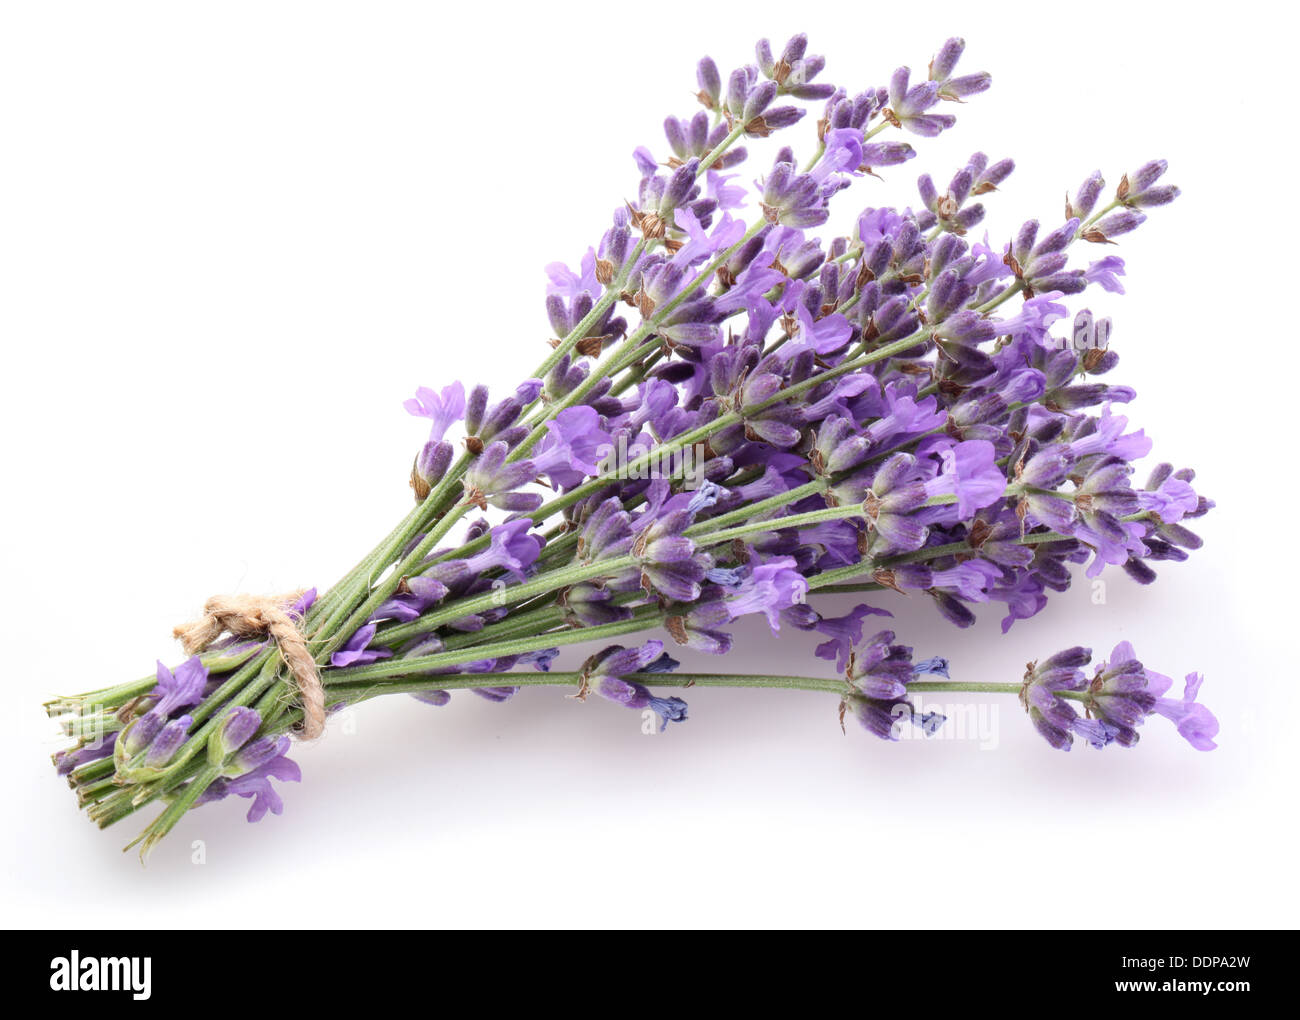 Bunch of lavender on a white background. Stock Photo